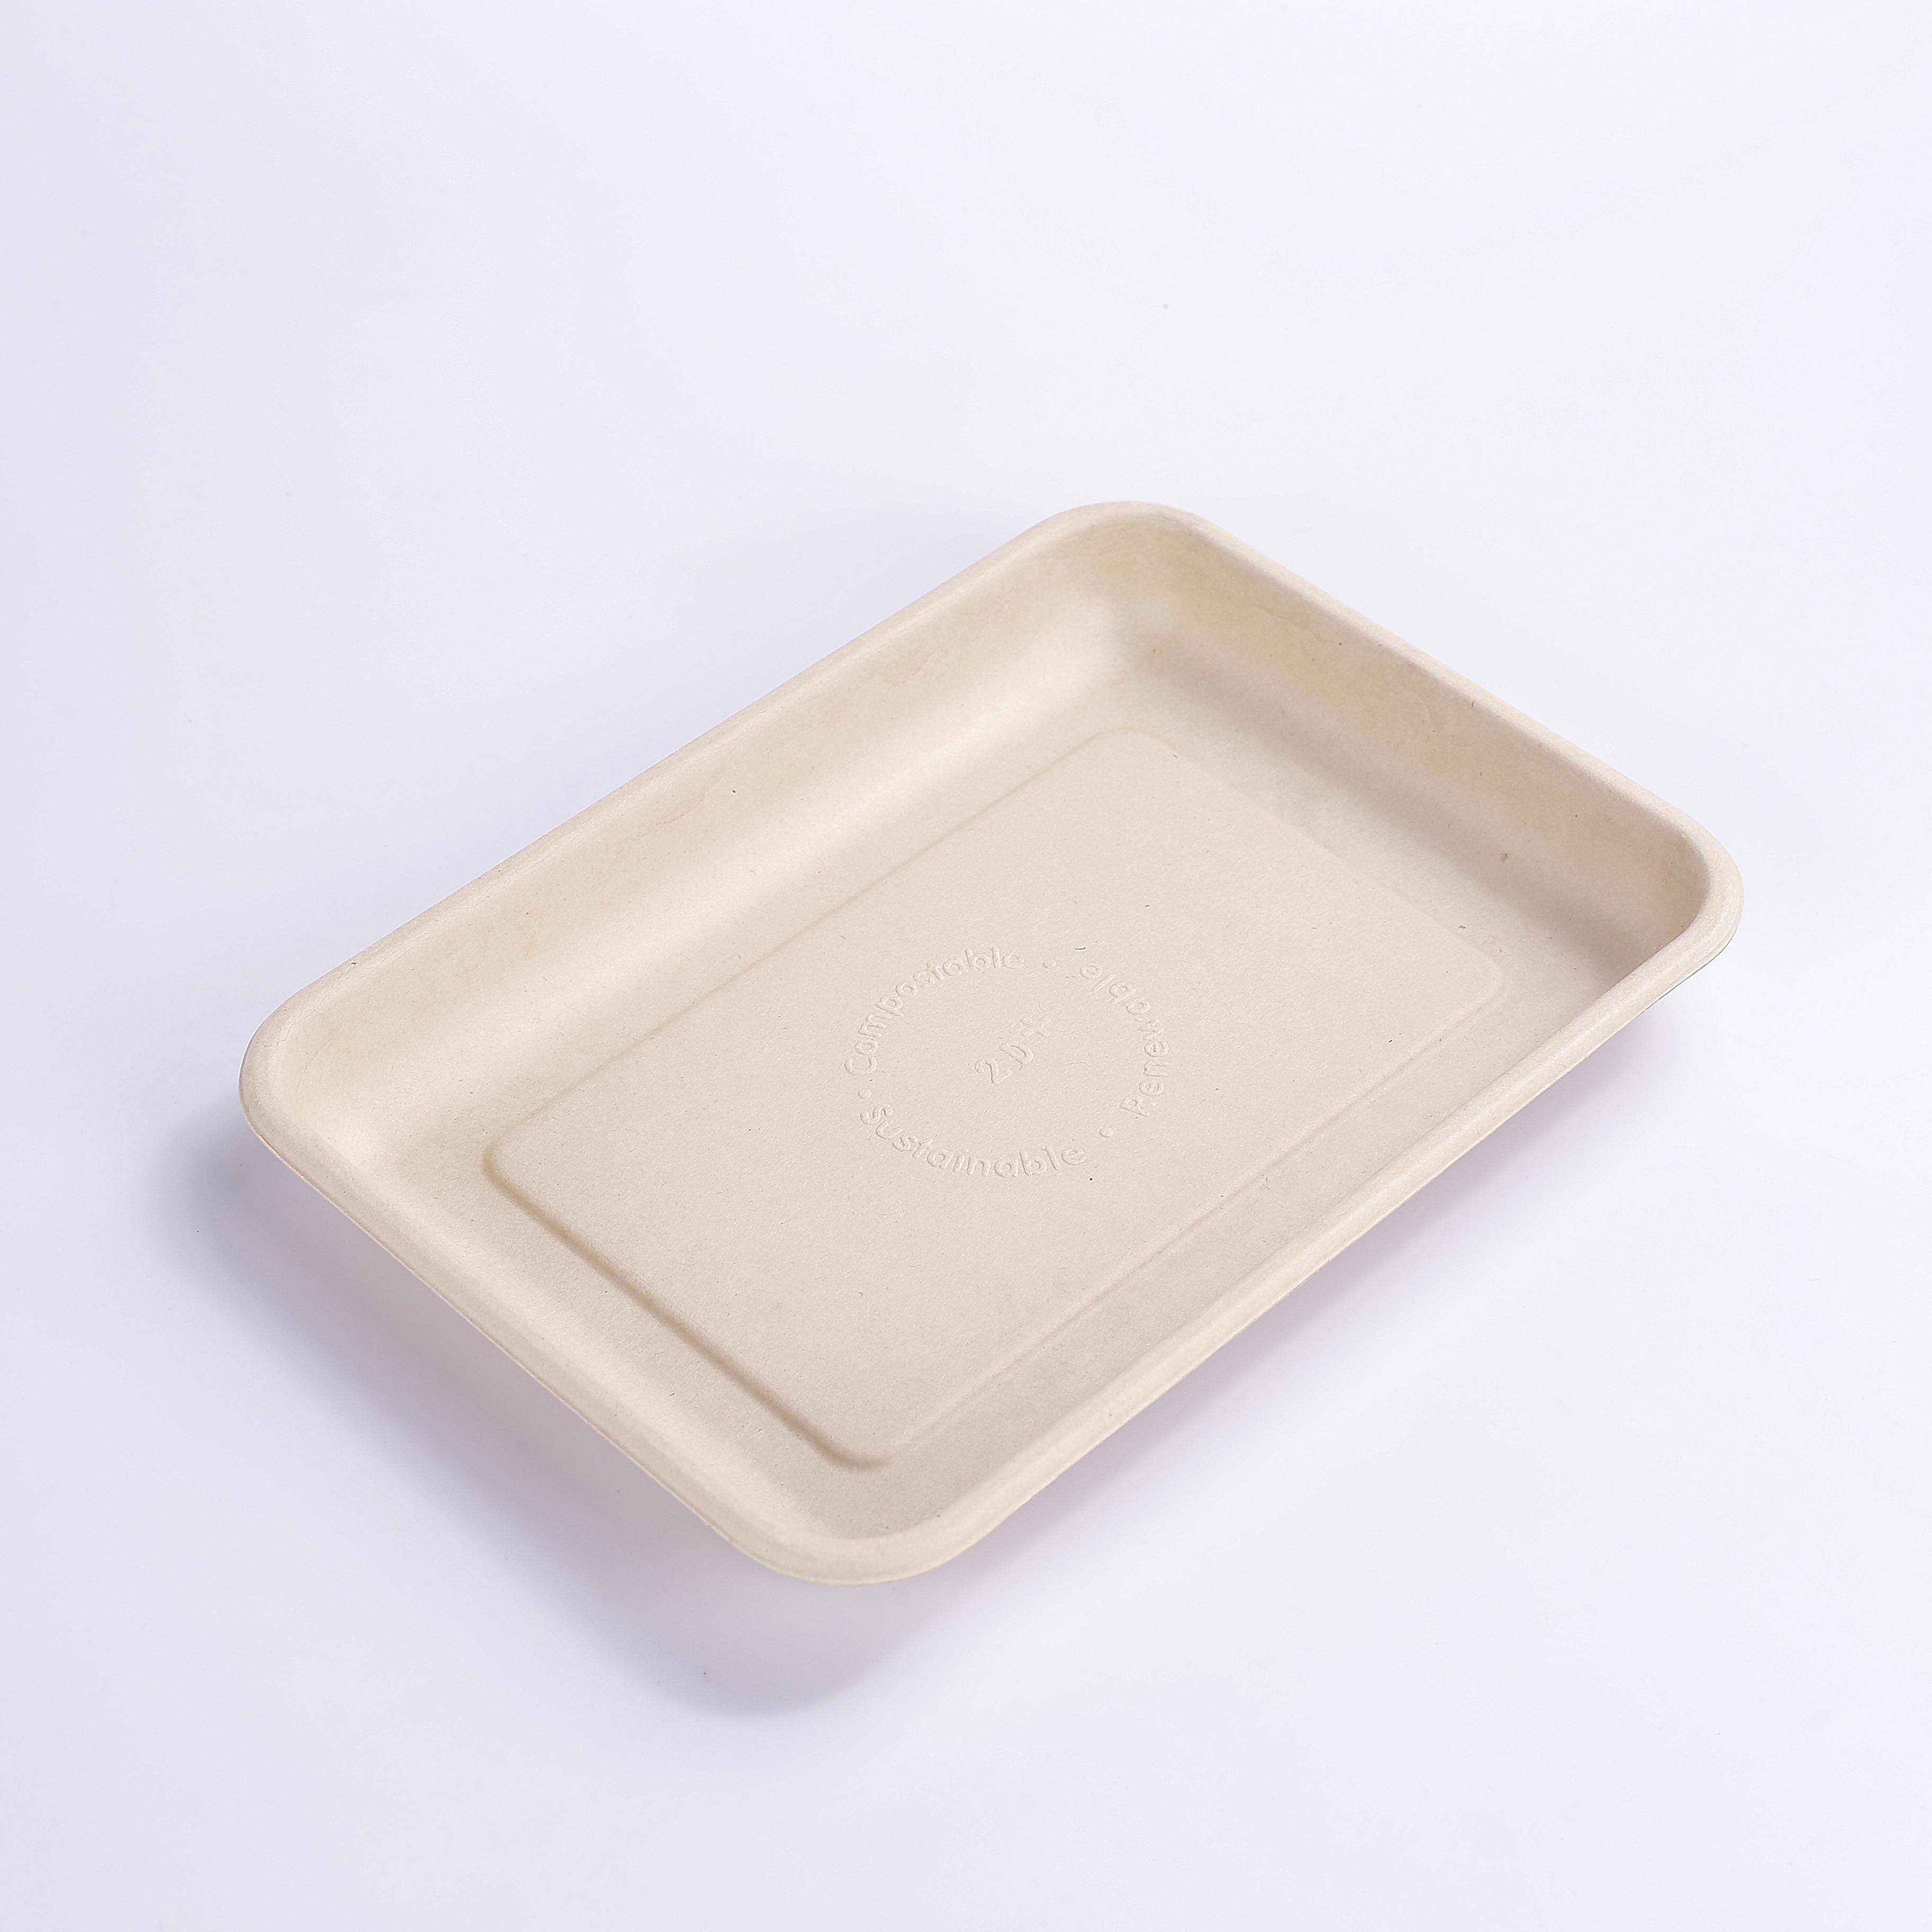 Super Lowest Price Disposable Tray - 9*6.5 INCH Compostable Heavy-Duty Disposable Food BBQ Fruit Tray, Microwave Paper Plates Waterproof and Oil-Proof Heavy Duty Trays, 100% Biodegradable Rectangl...